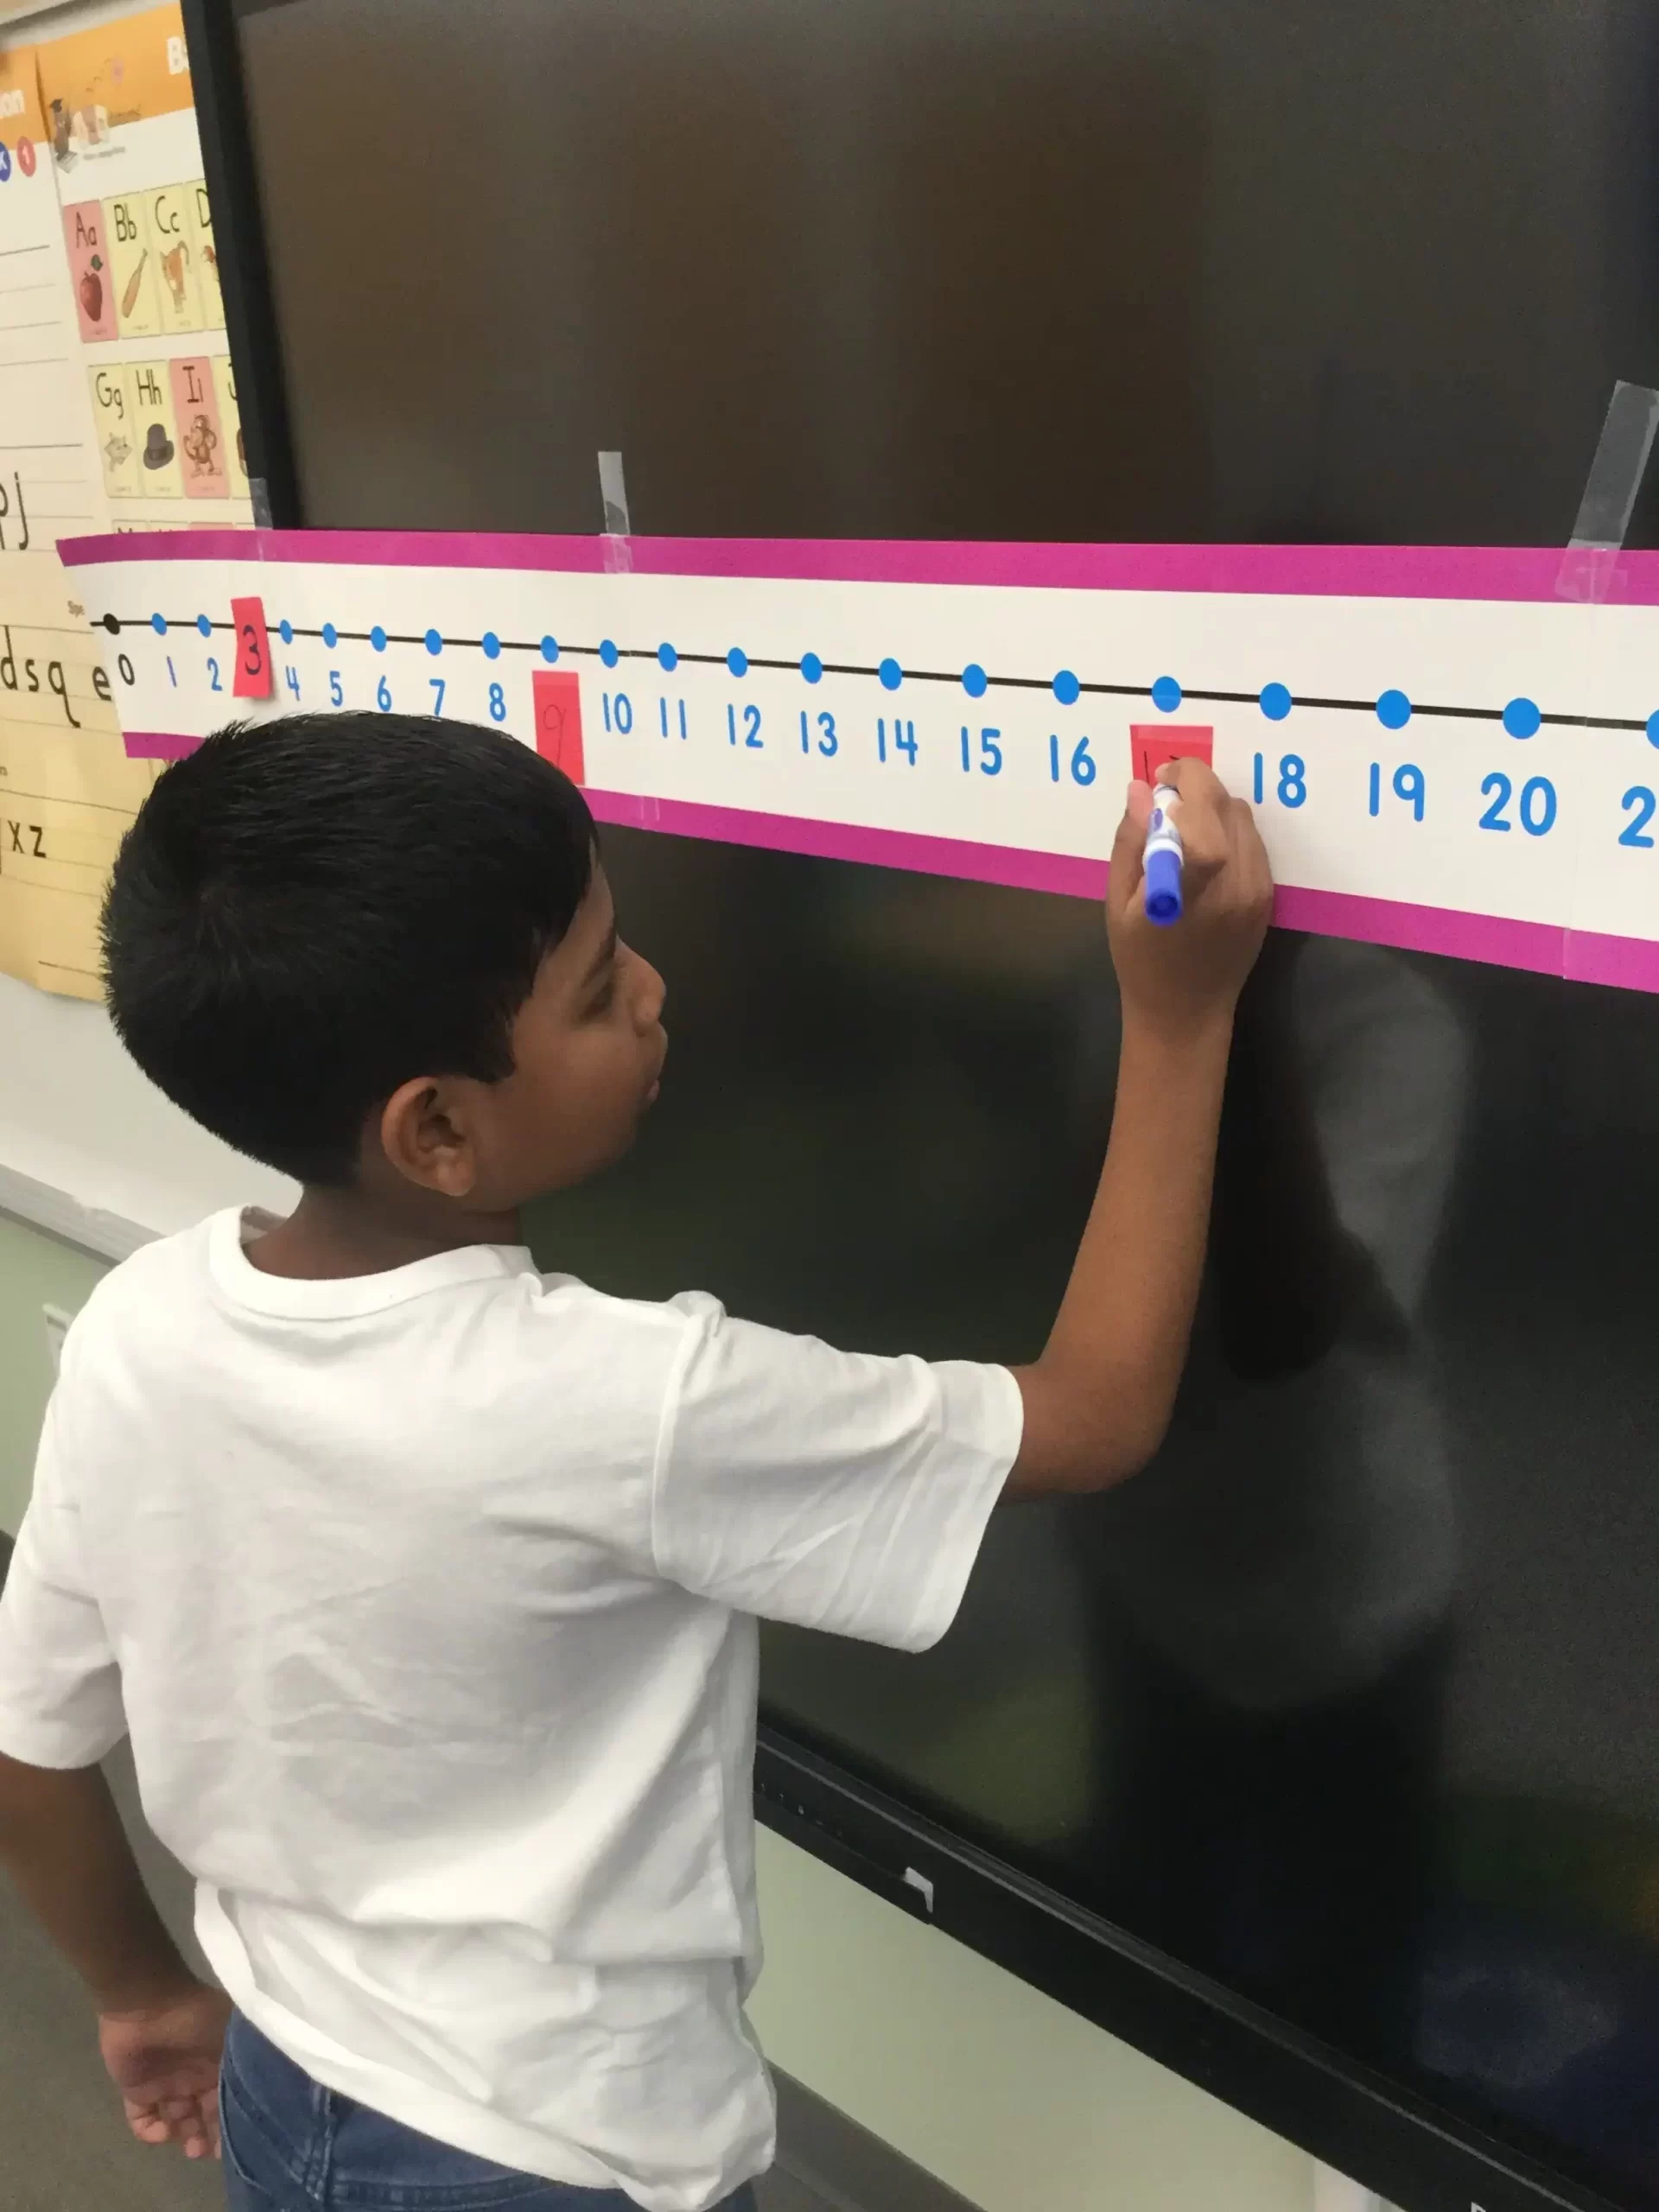 boy wearing a white shirt using a number line to solve number problems.